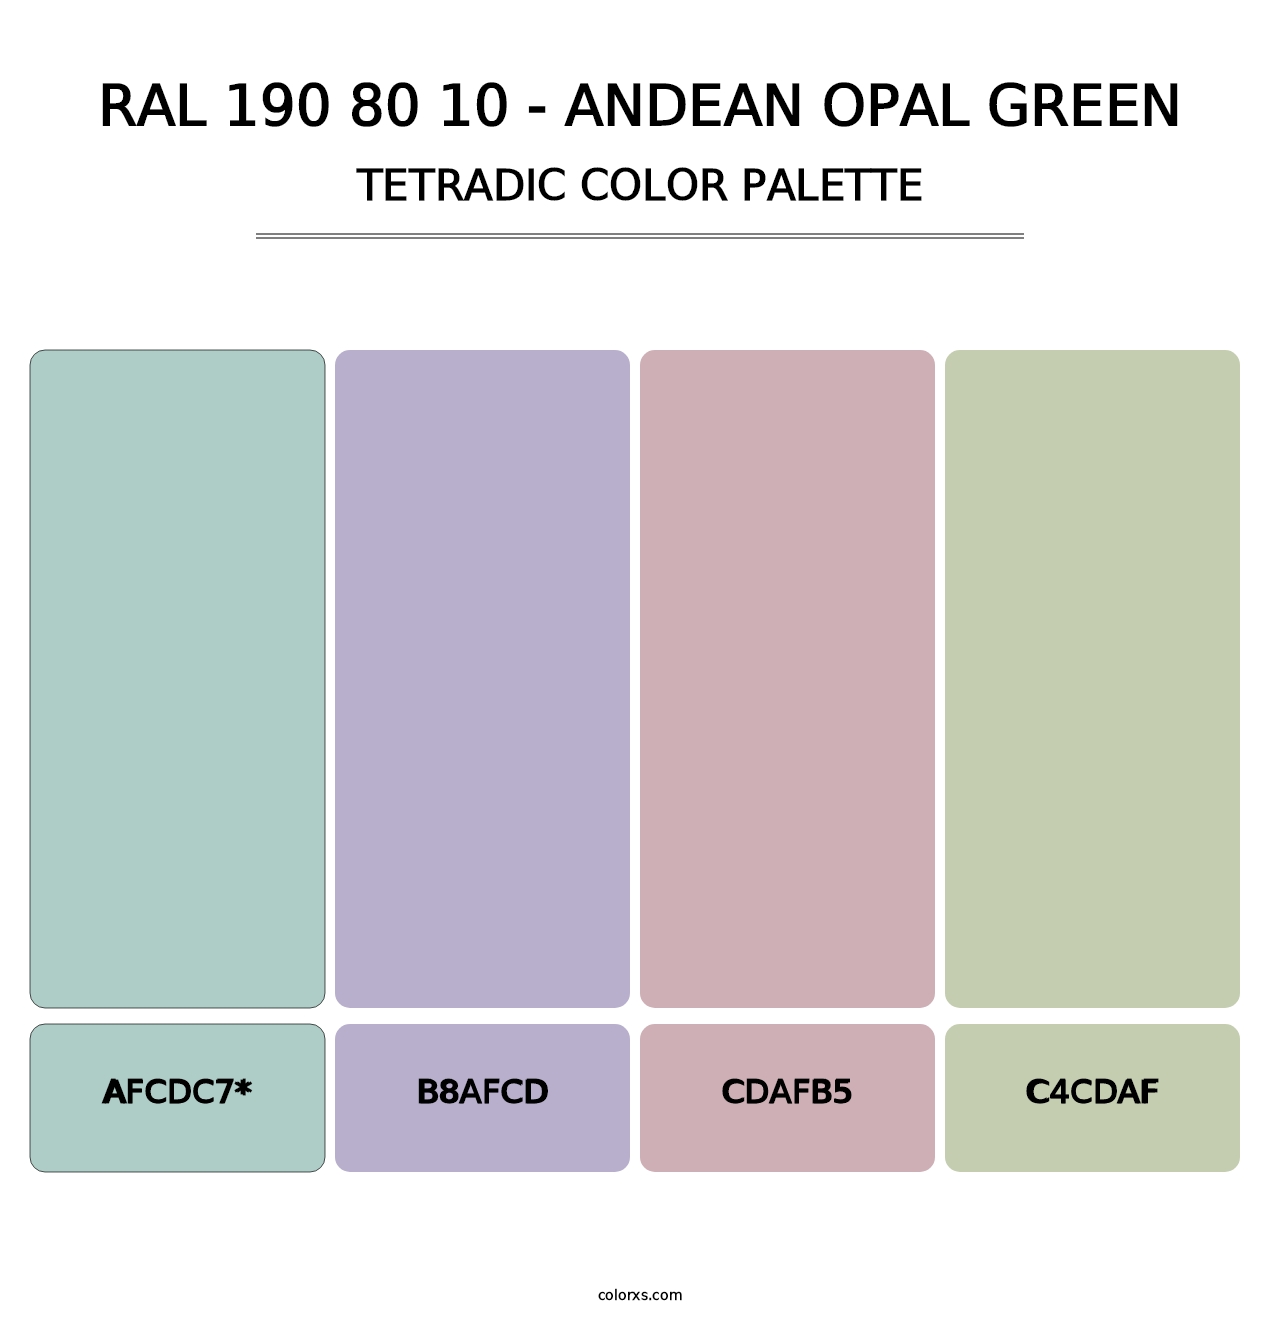 RAL 190 80 10 - Andean Opal Green - Tetradic Color Palette